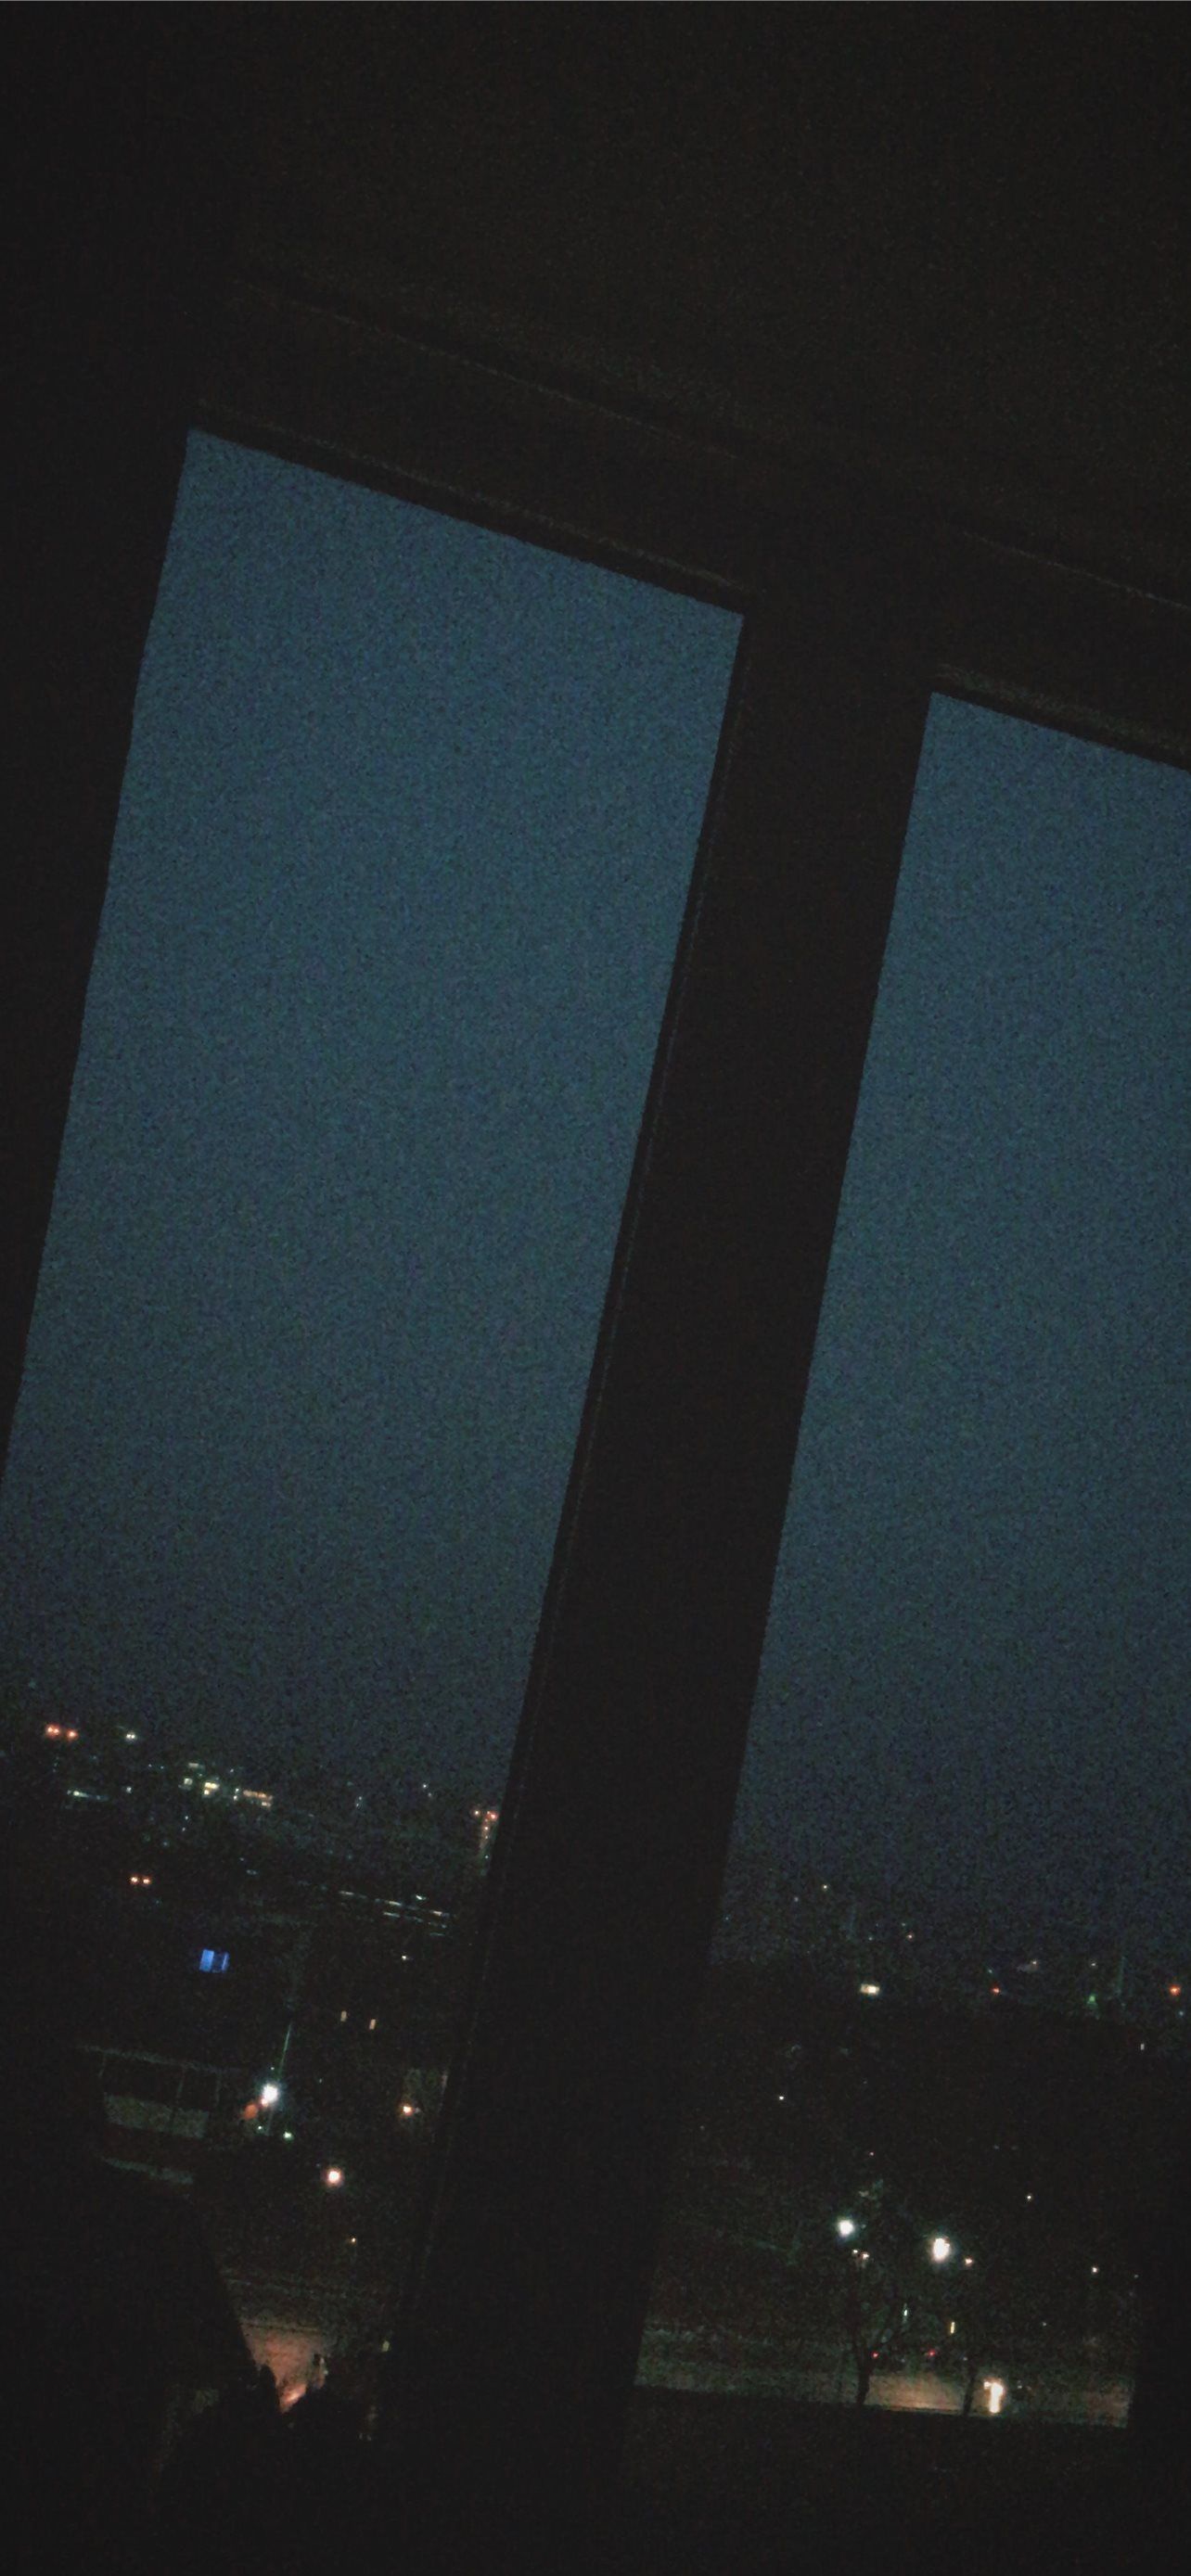 A dark room with two windows, one on the left and one on the right. The left window is covered with a blind. The right window shows a city skyline at night. - Lo fi